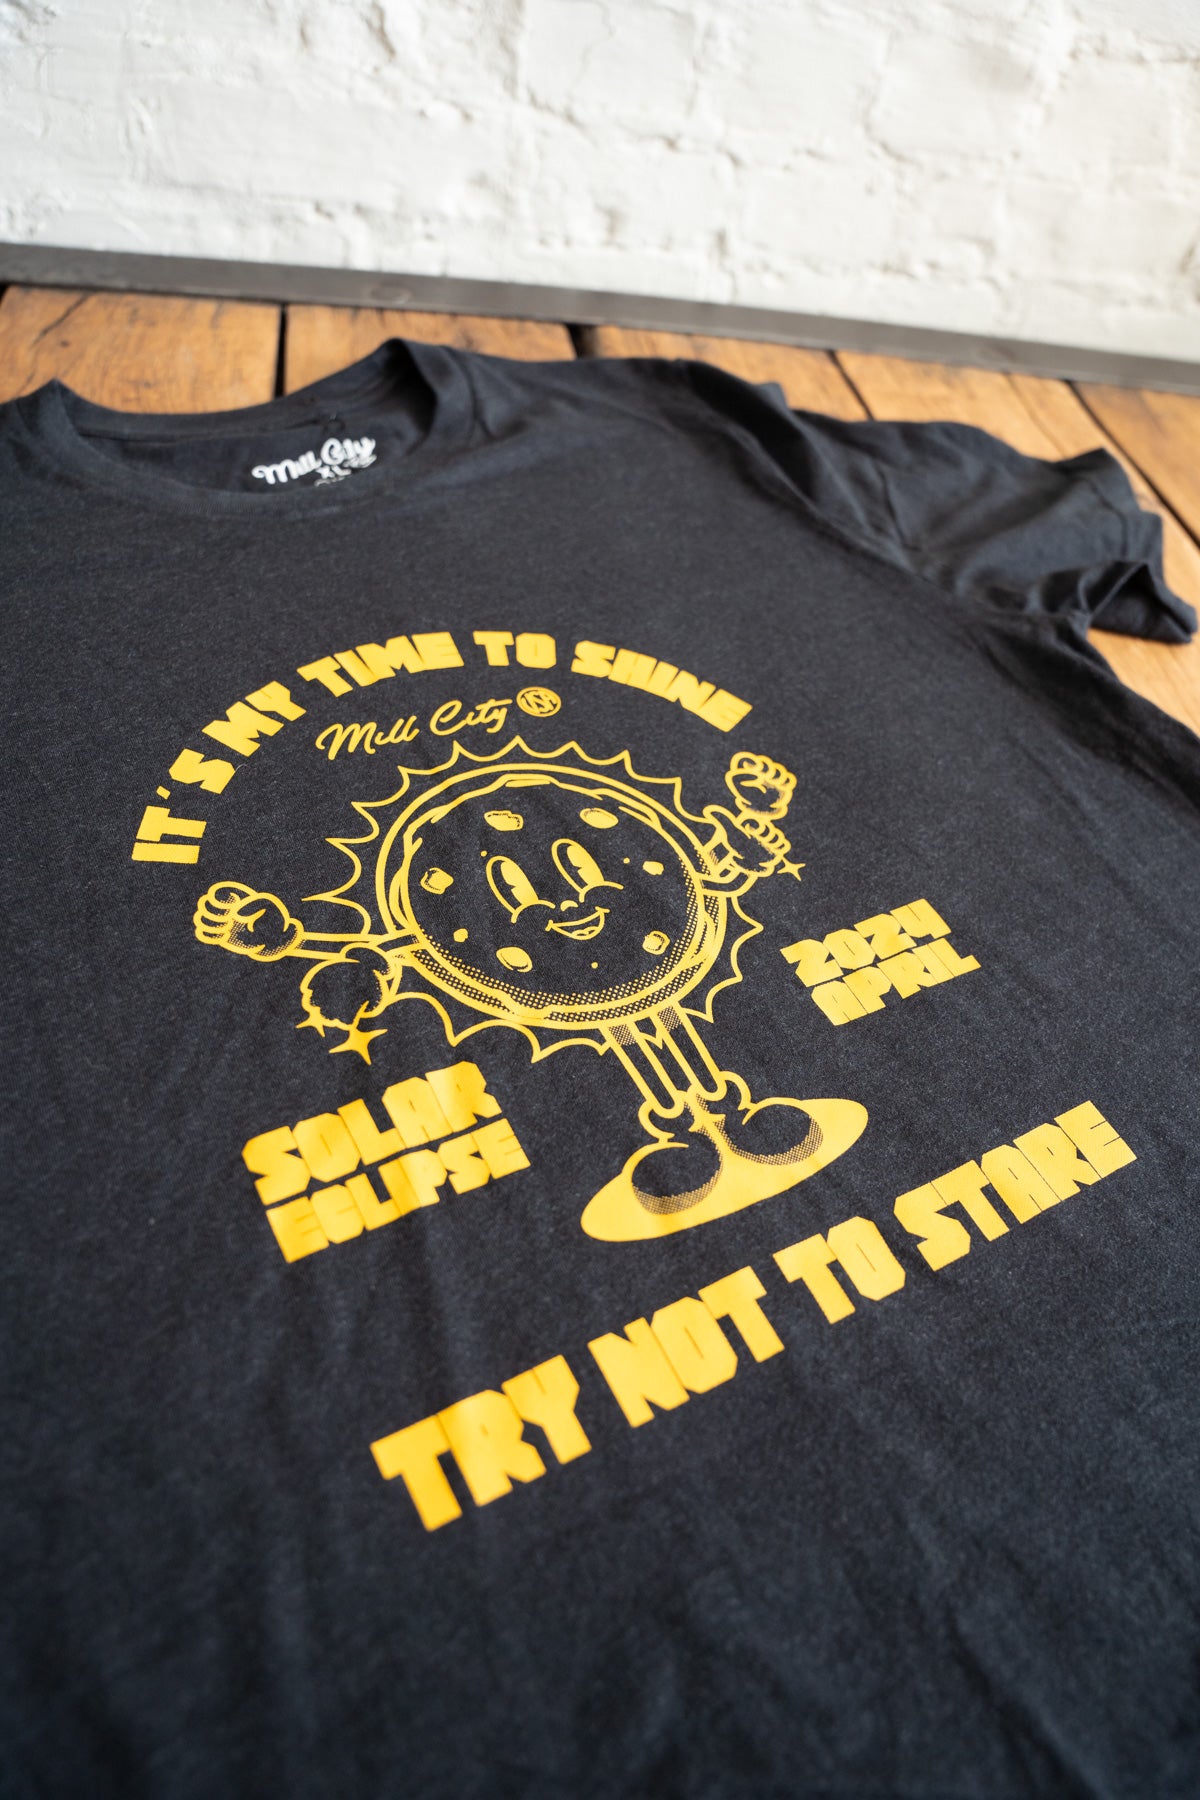 It's My Time To Shine Tee